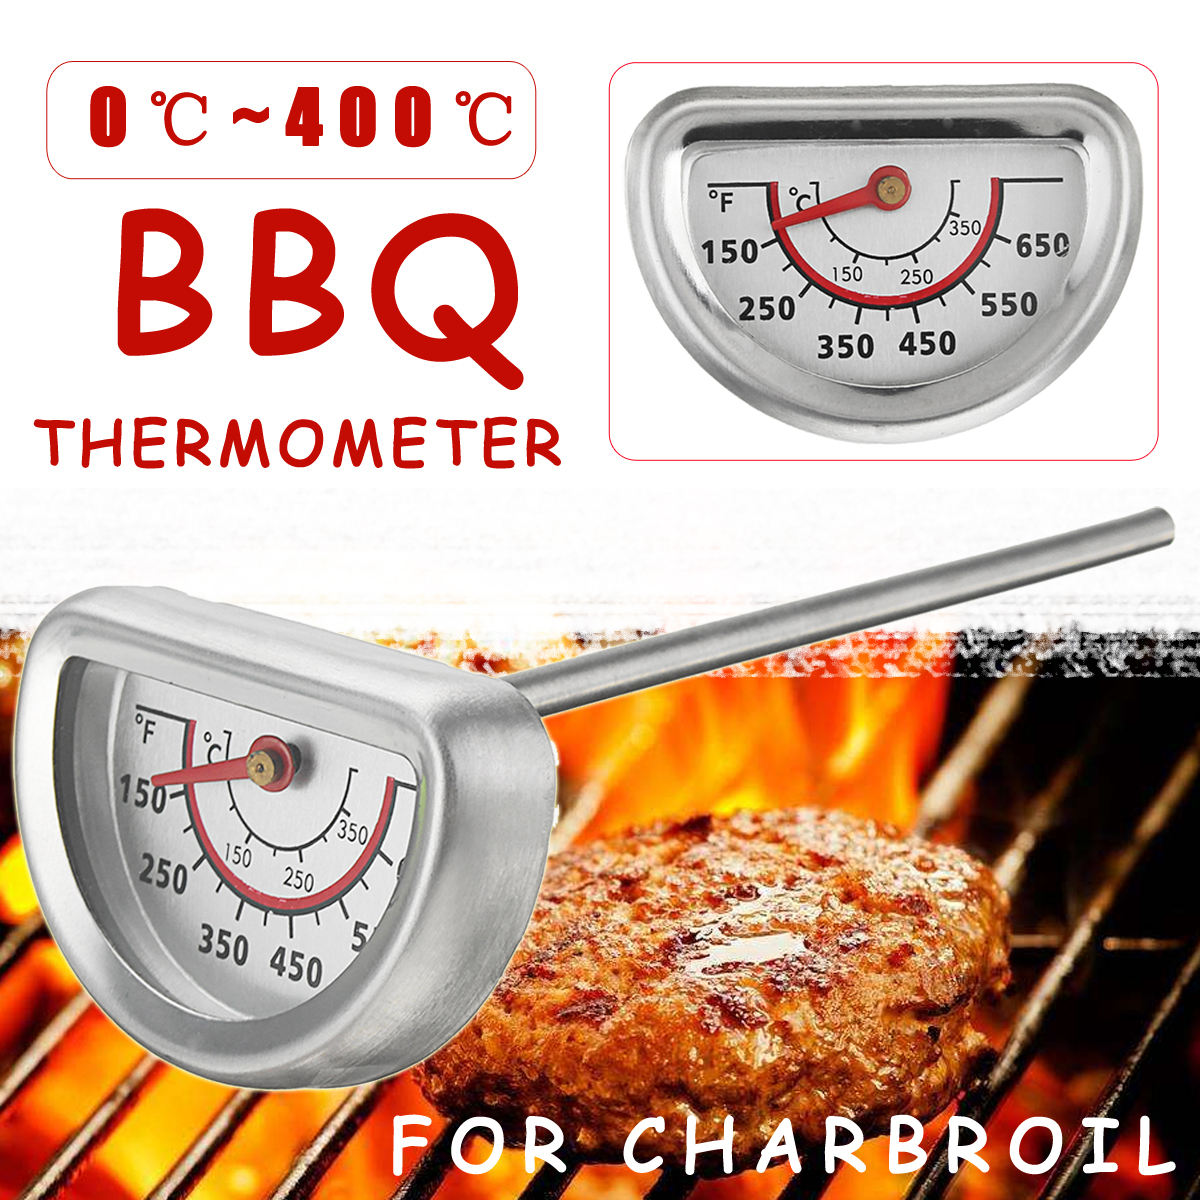 0400-BBQ-Bimetallic-Replacement-Thermometer-Heat-Indicator-For-Charbroil-1336515